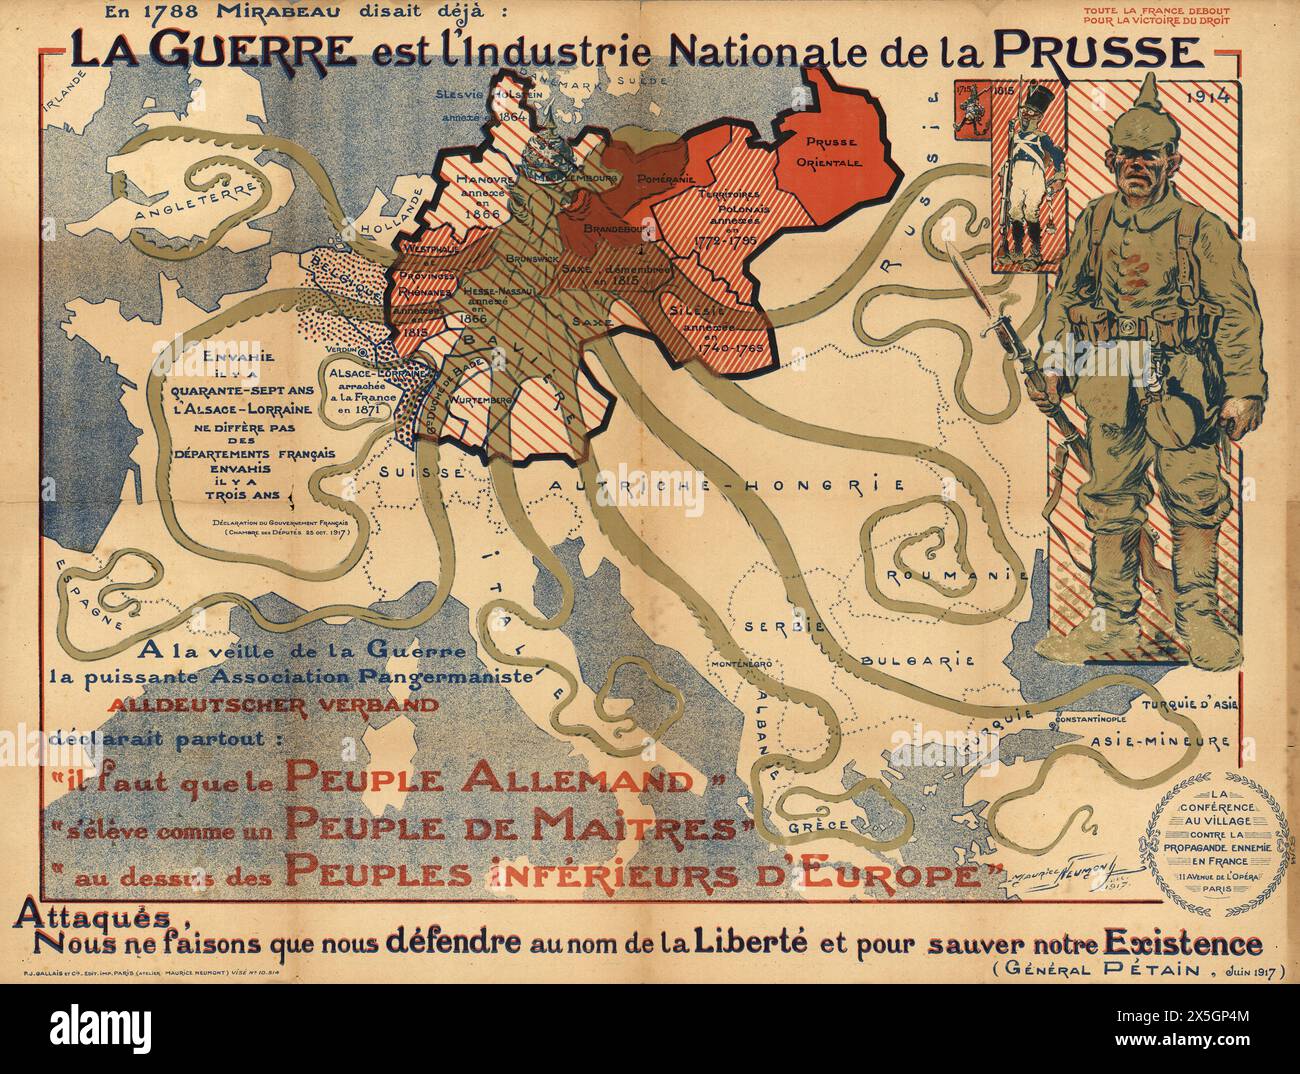 Vintage French WWI Poster Map:  'War is the national industry of Prussia. 'Attacked, we are fighting back in the name of liberty.'.  World war One French propaganda poster by Maurice Neumont, with German Empire of Prussia  depicted as an octopus whose tentacles are reaching into Europe Stock Photo